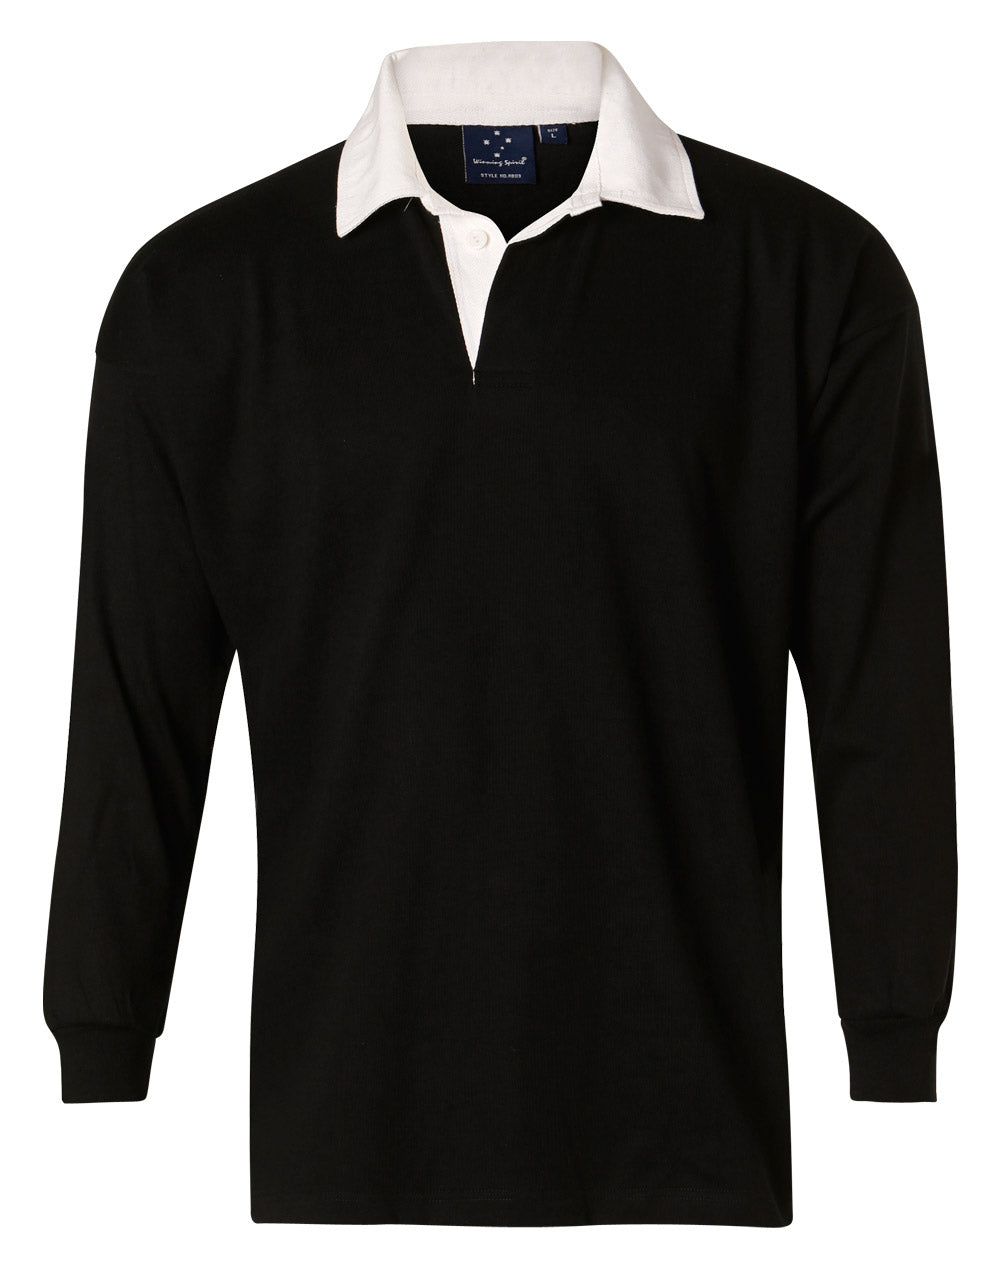 JCRB03 GRANGE Rugby Top